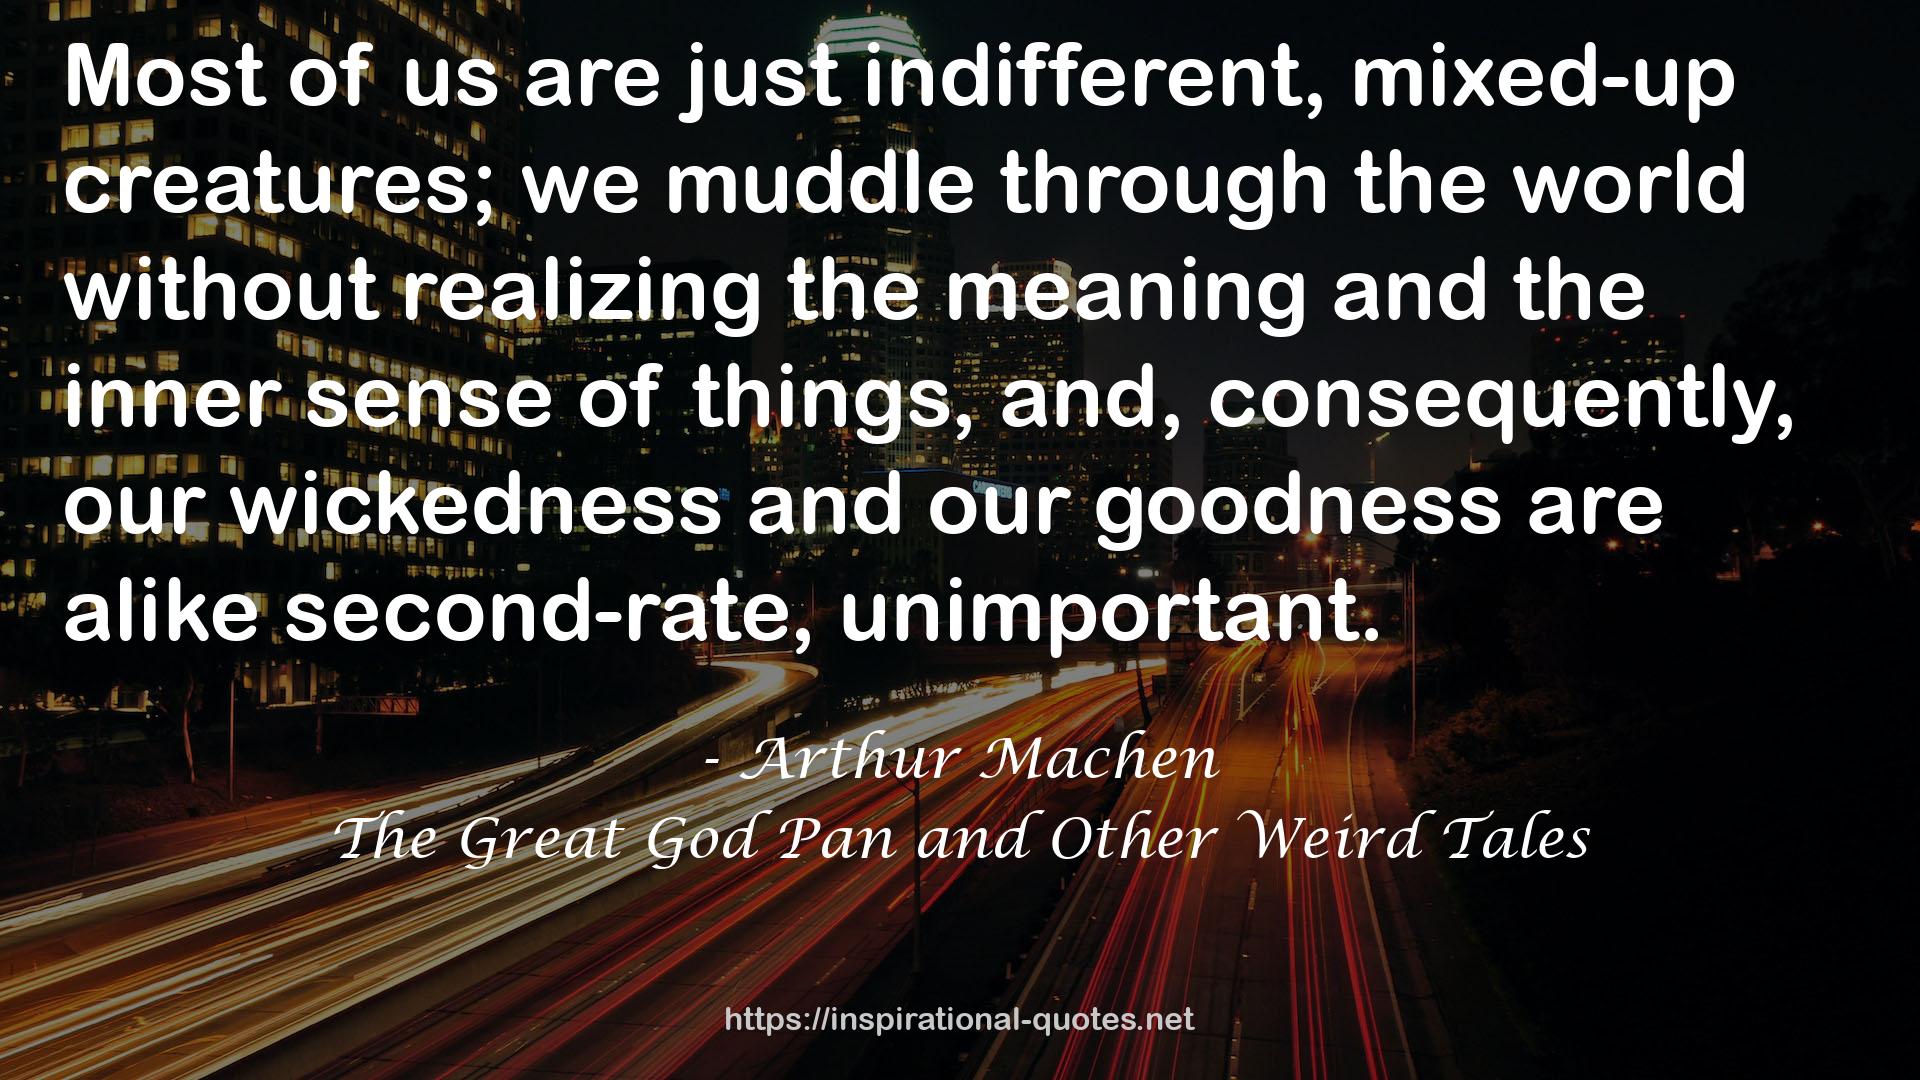 The Great God Pan and Other Weird Tales QUOTES